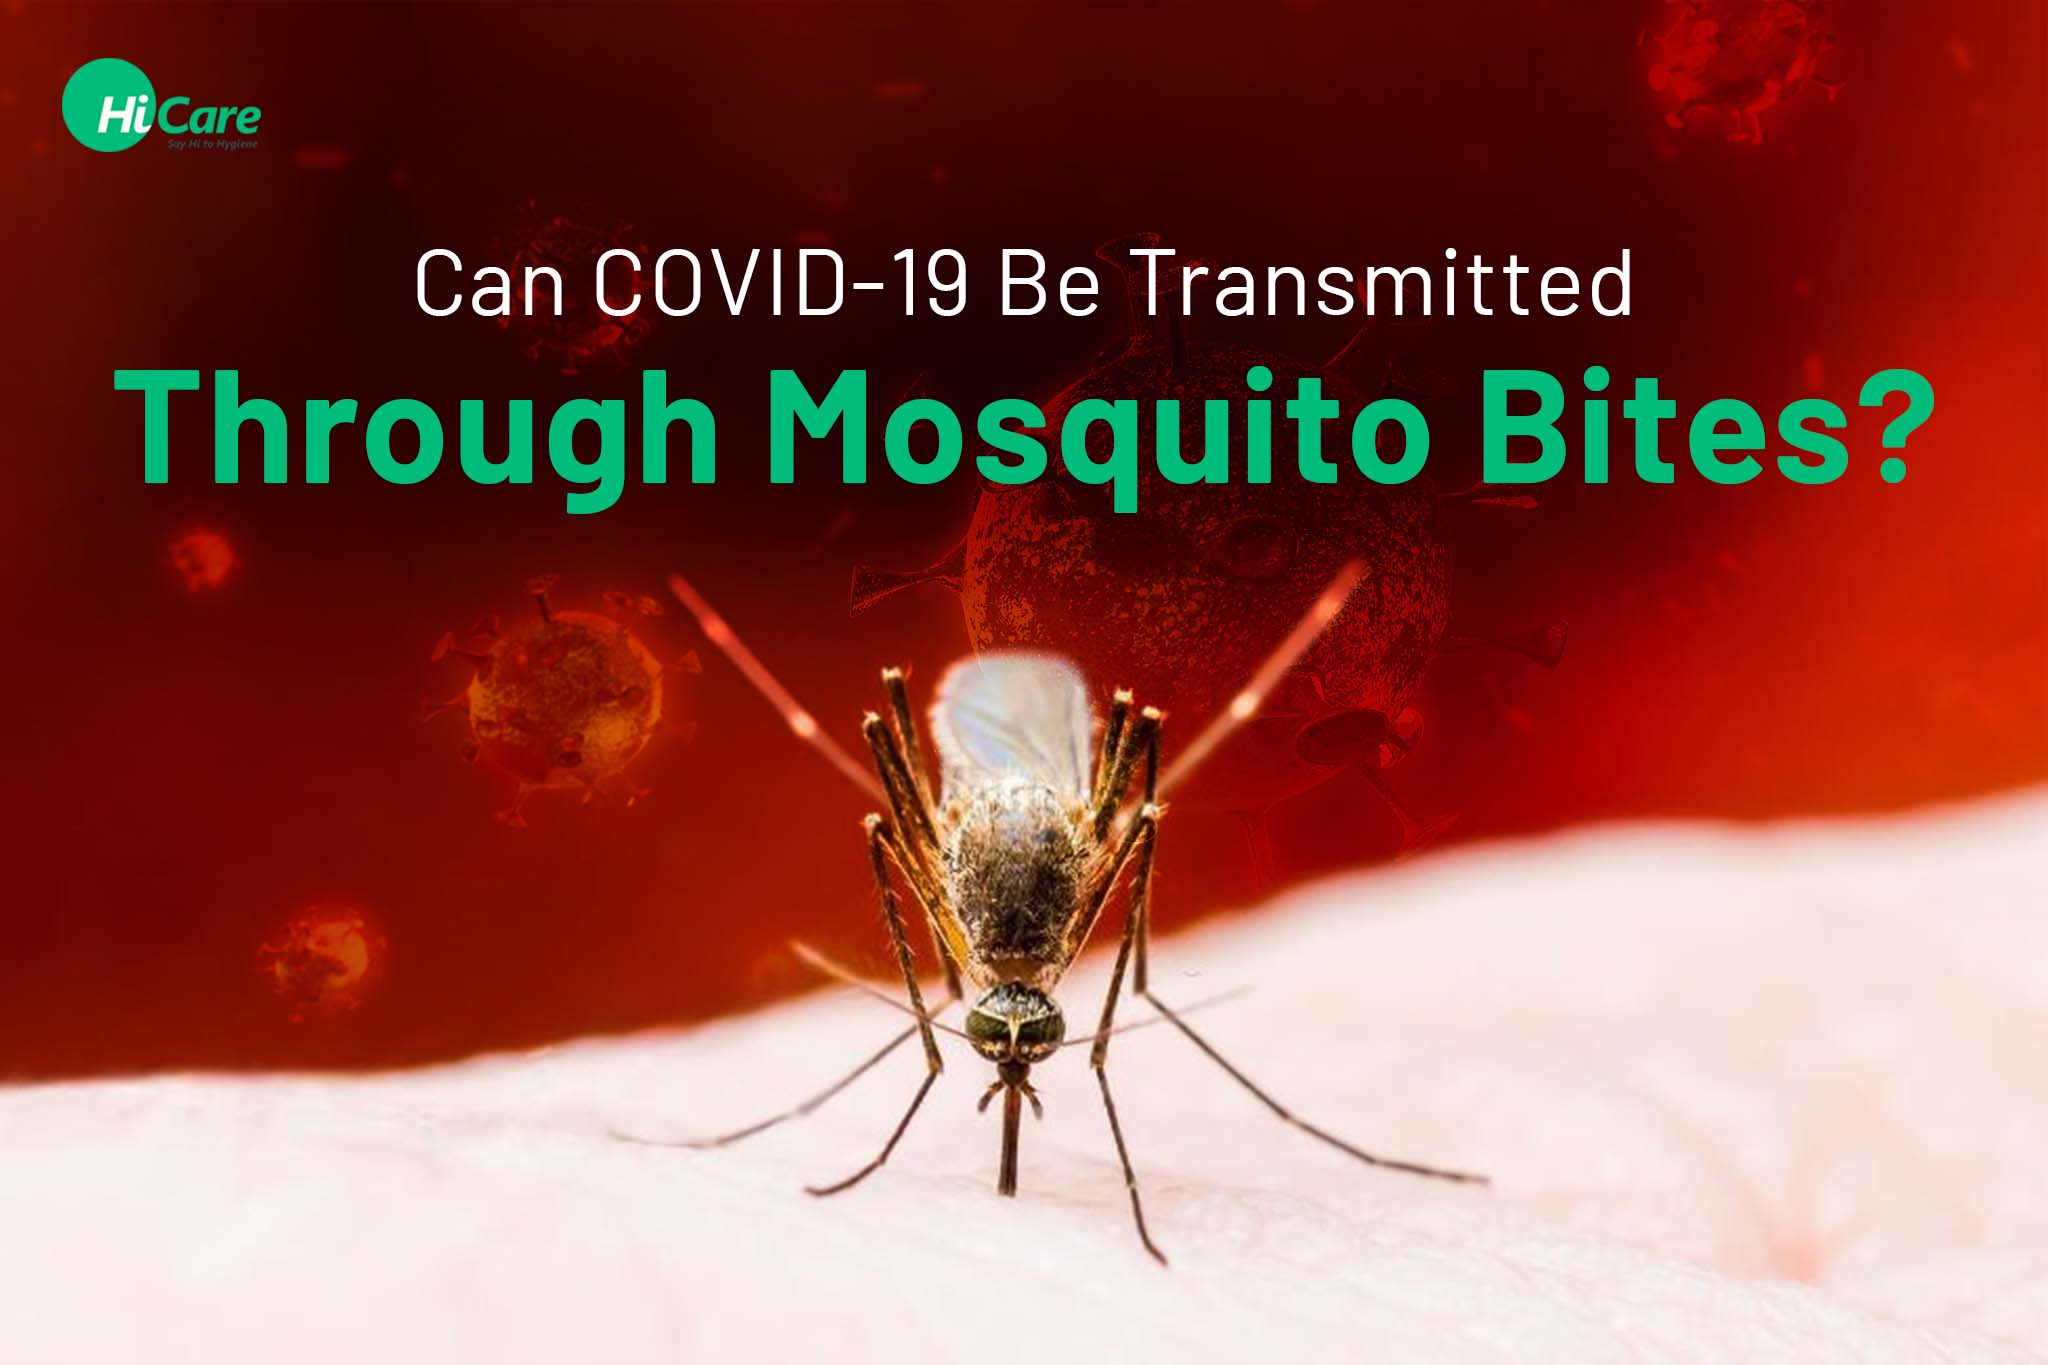 Can COVID-19 Be Transmitted Through Mosquito Bites?